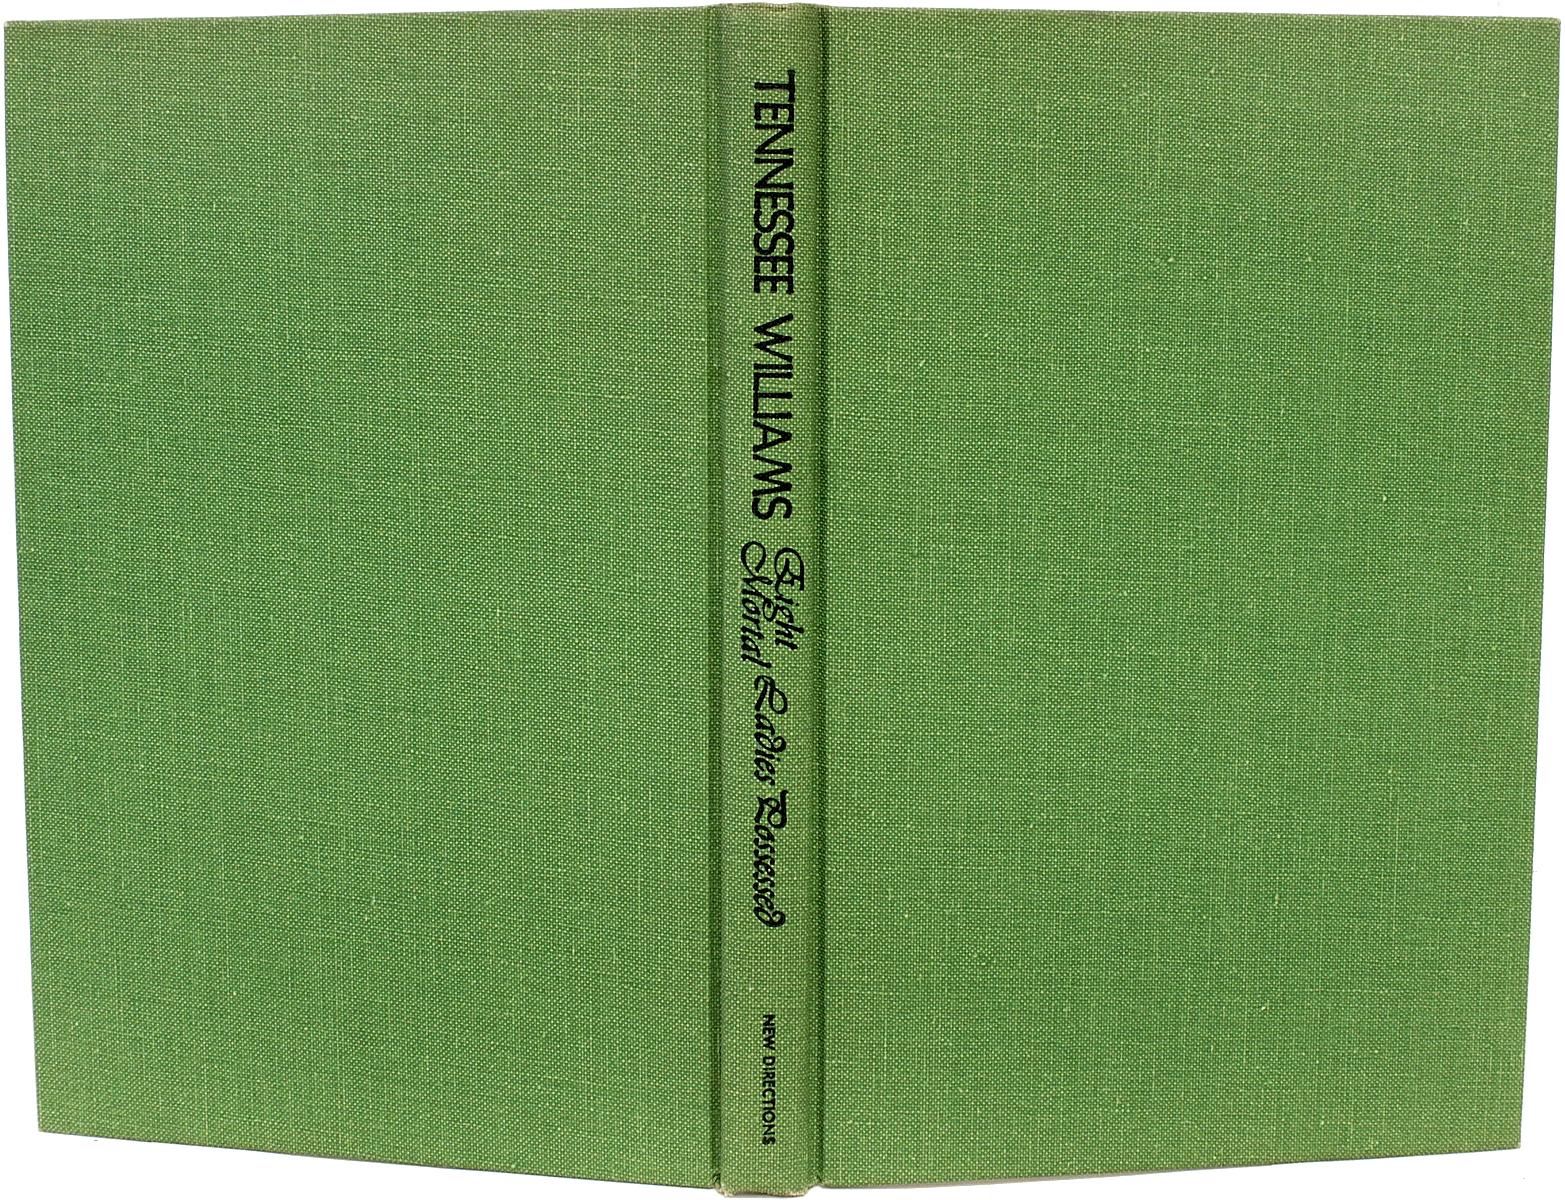 American Tennessee Williams, Eight Mortal Ladies Possessed, First Edition Signed, 1974